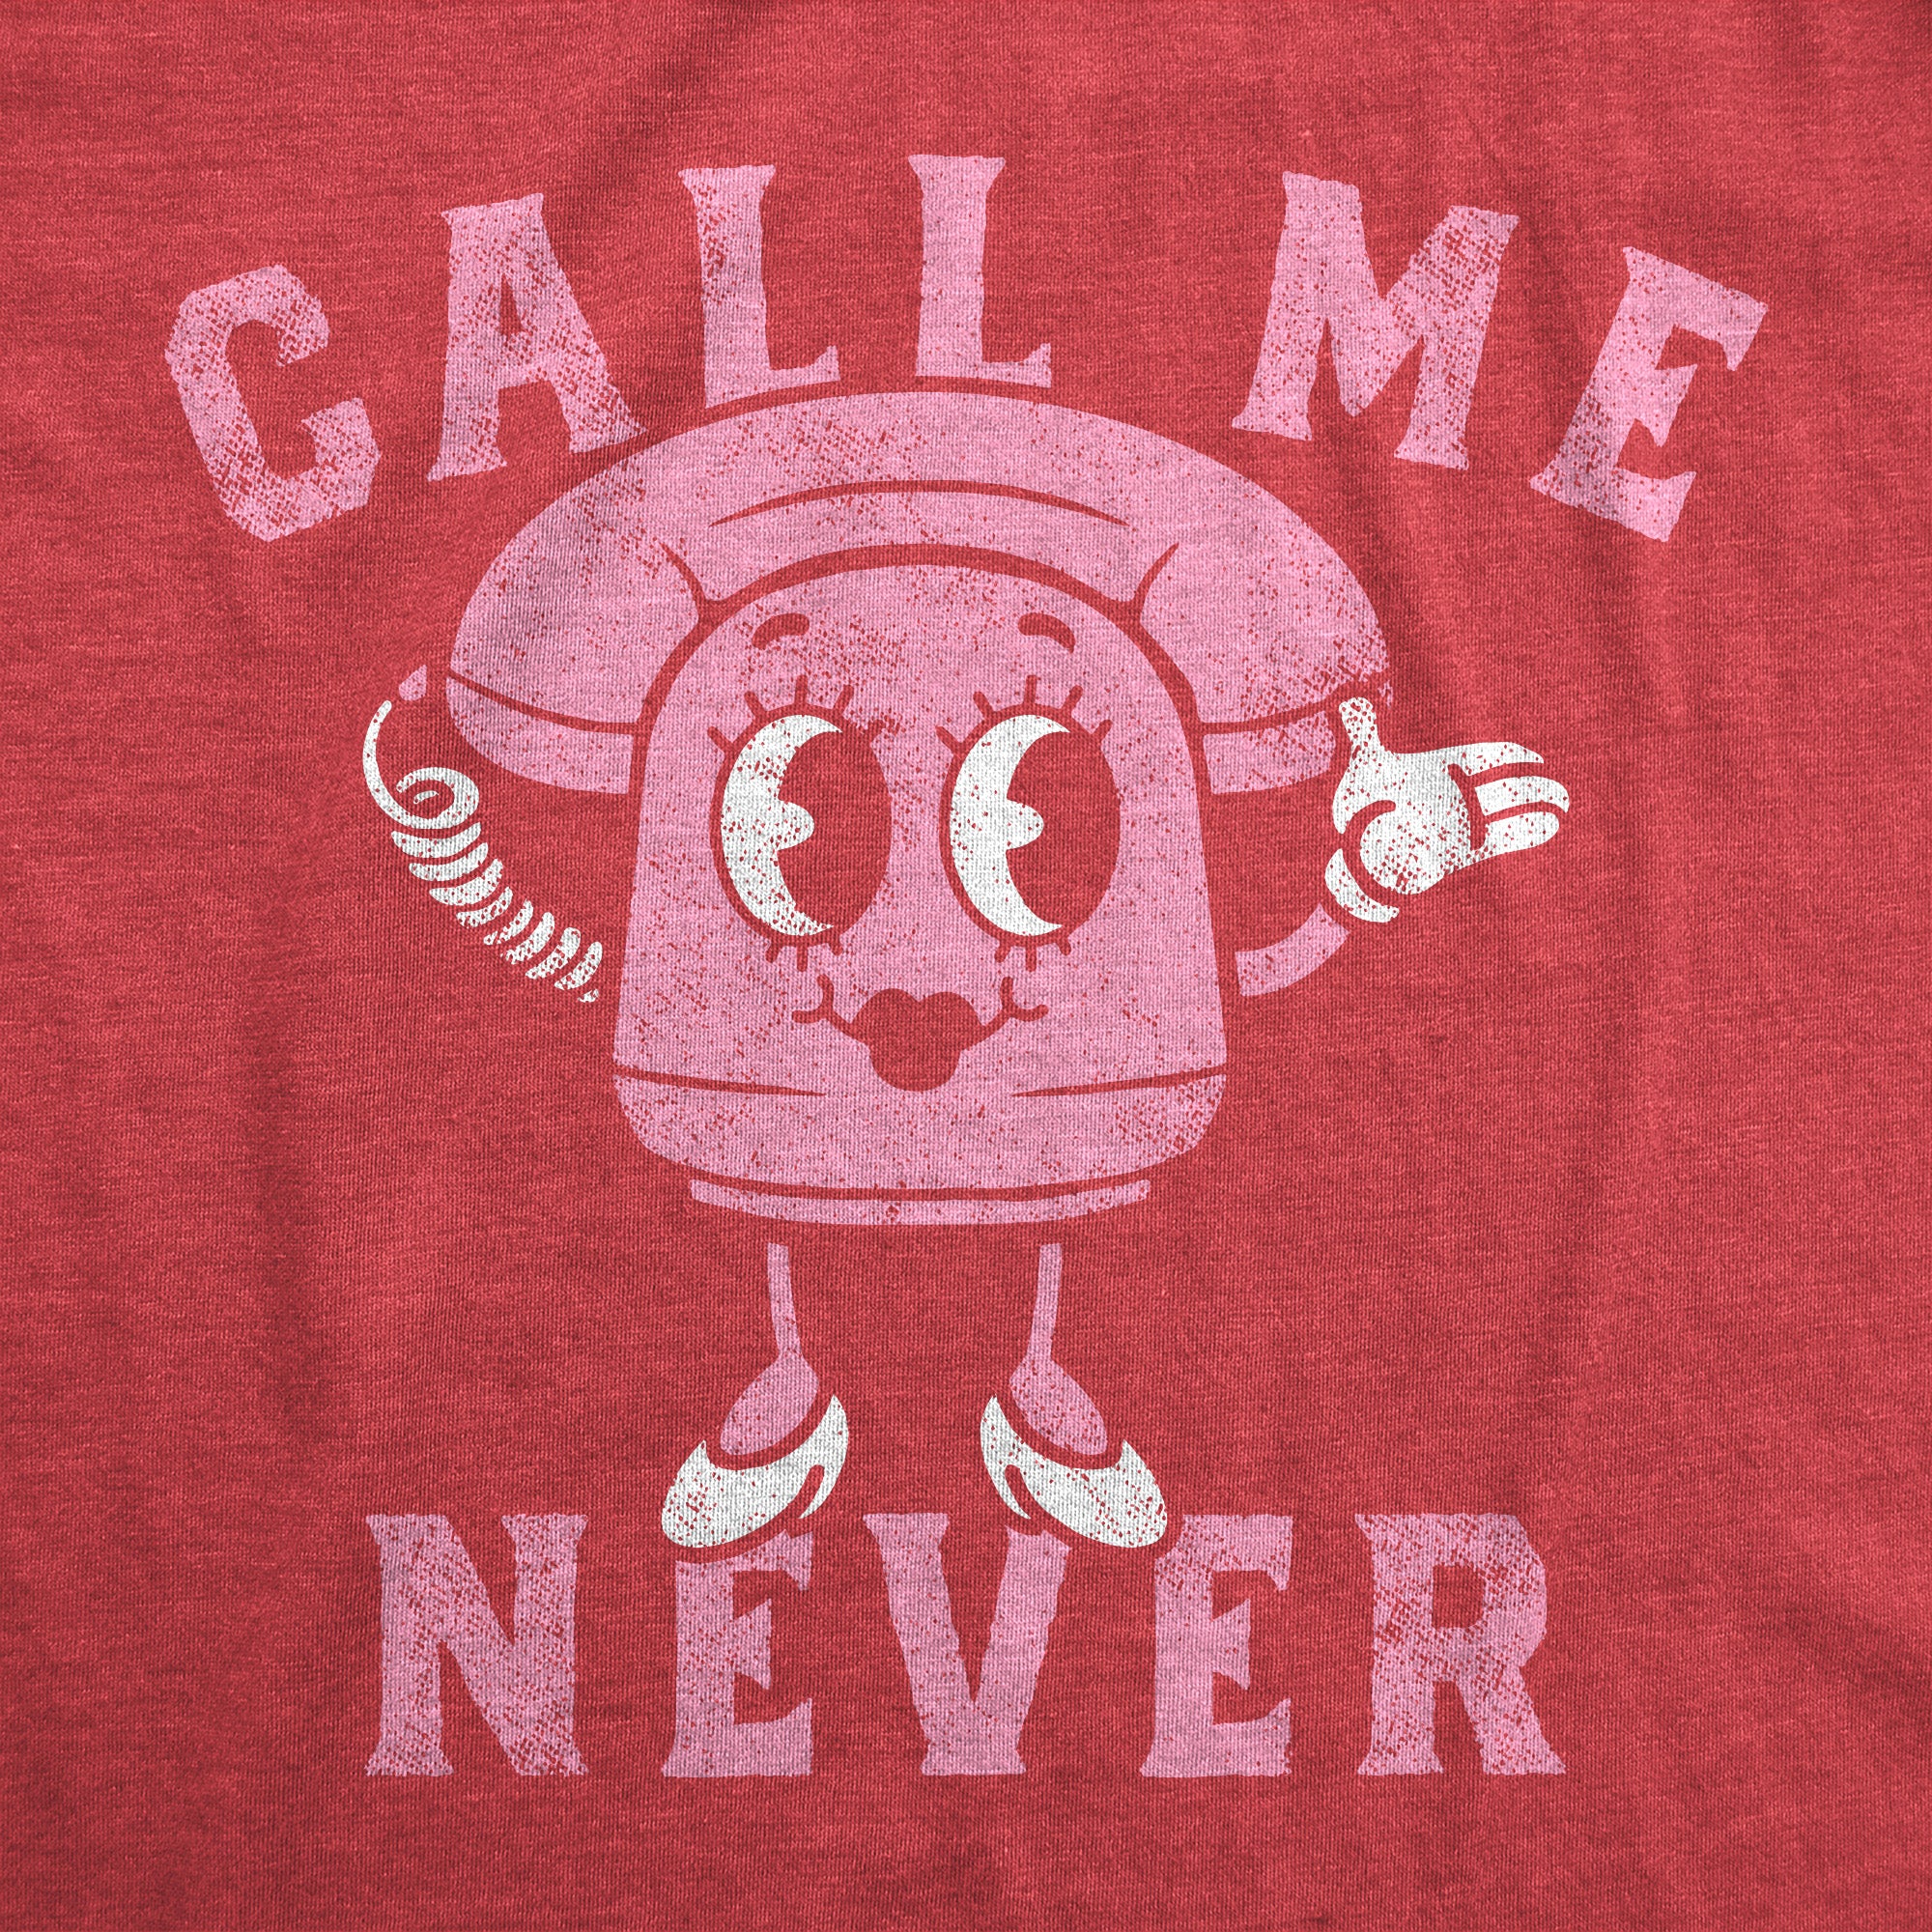 Funny Heather Red - Call Me Never Call Me Never Womens T Shirt Nerdy Valentine's Day Sarcastic Tee